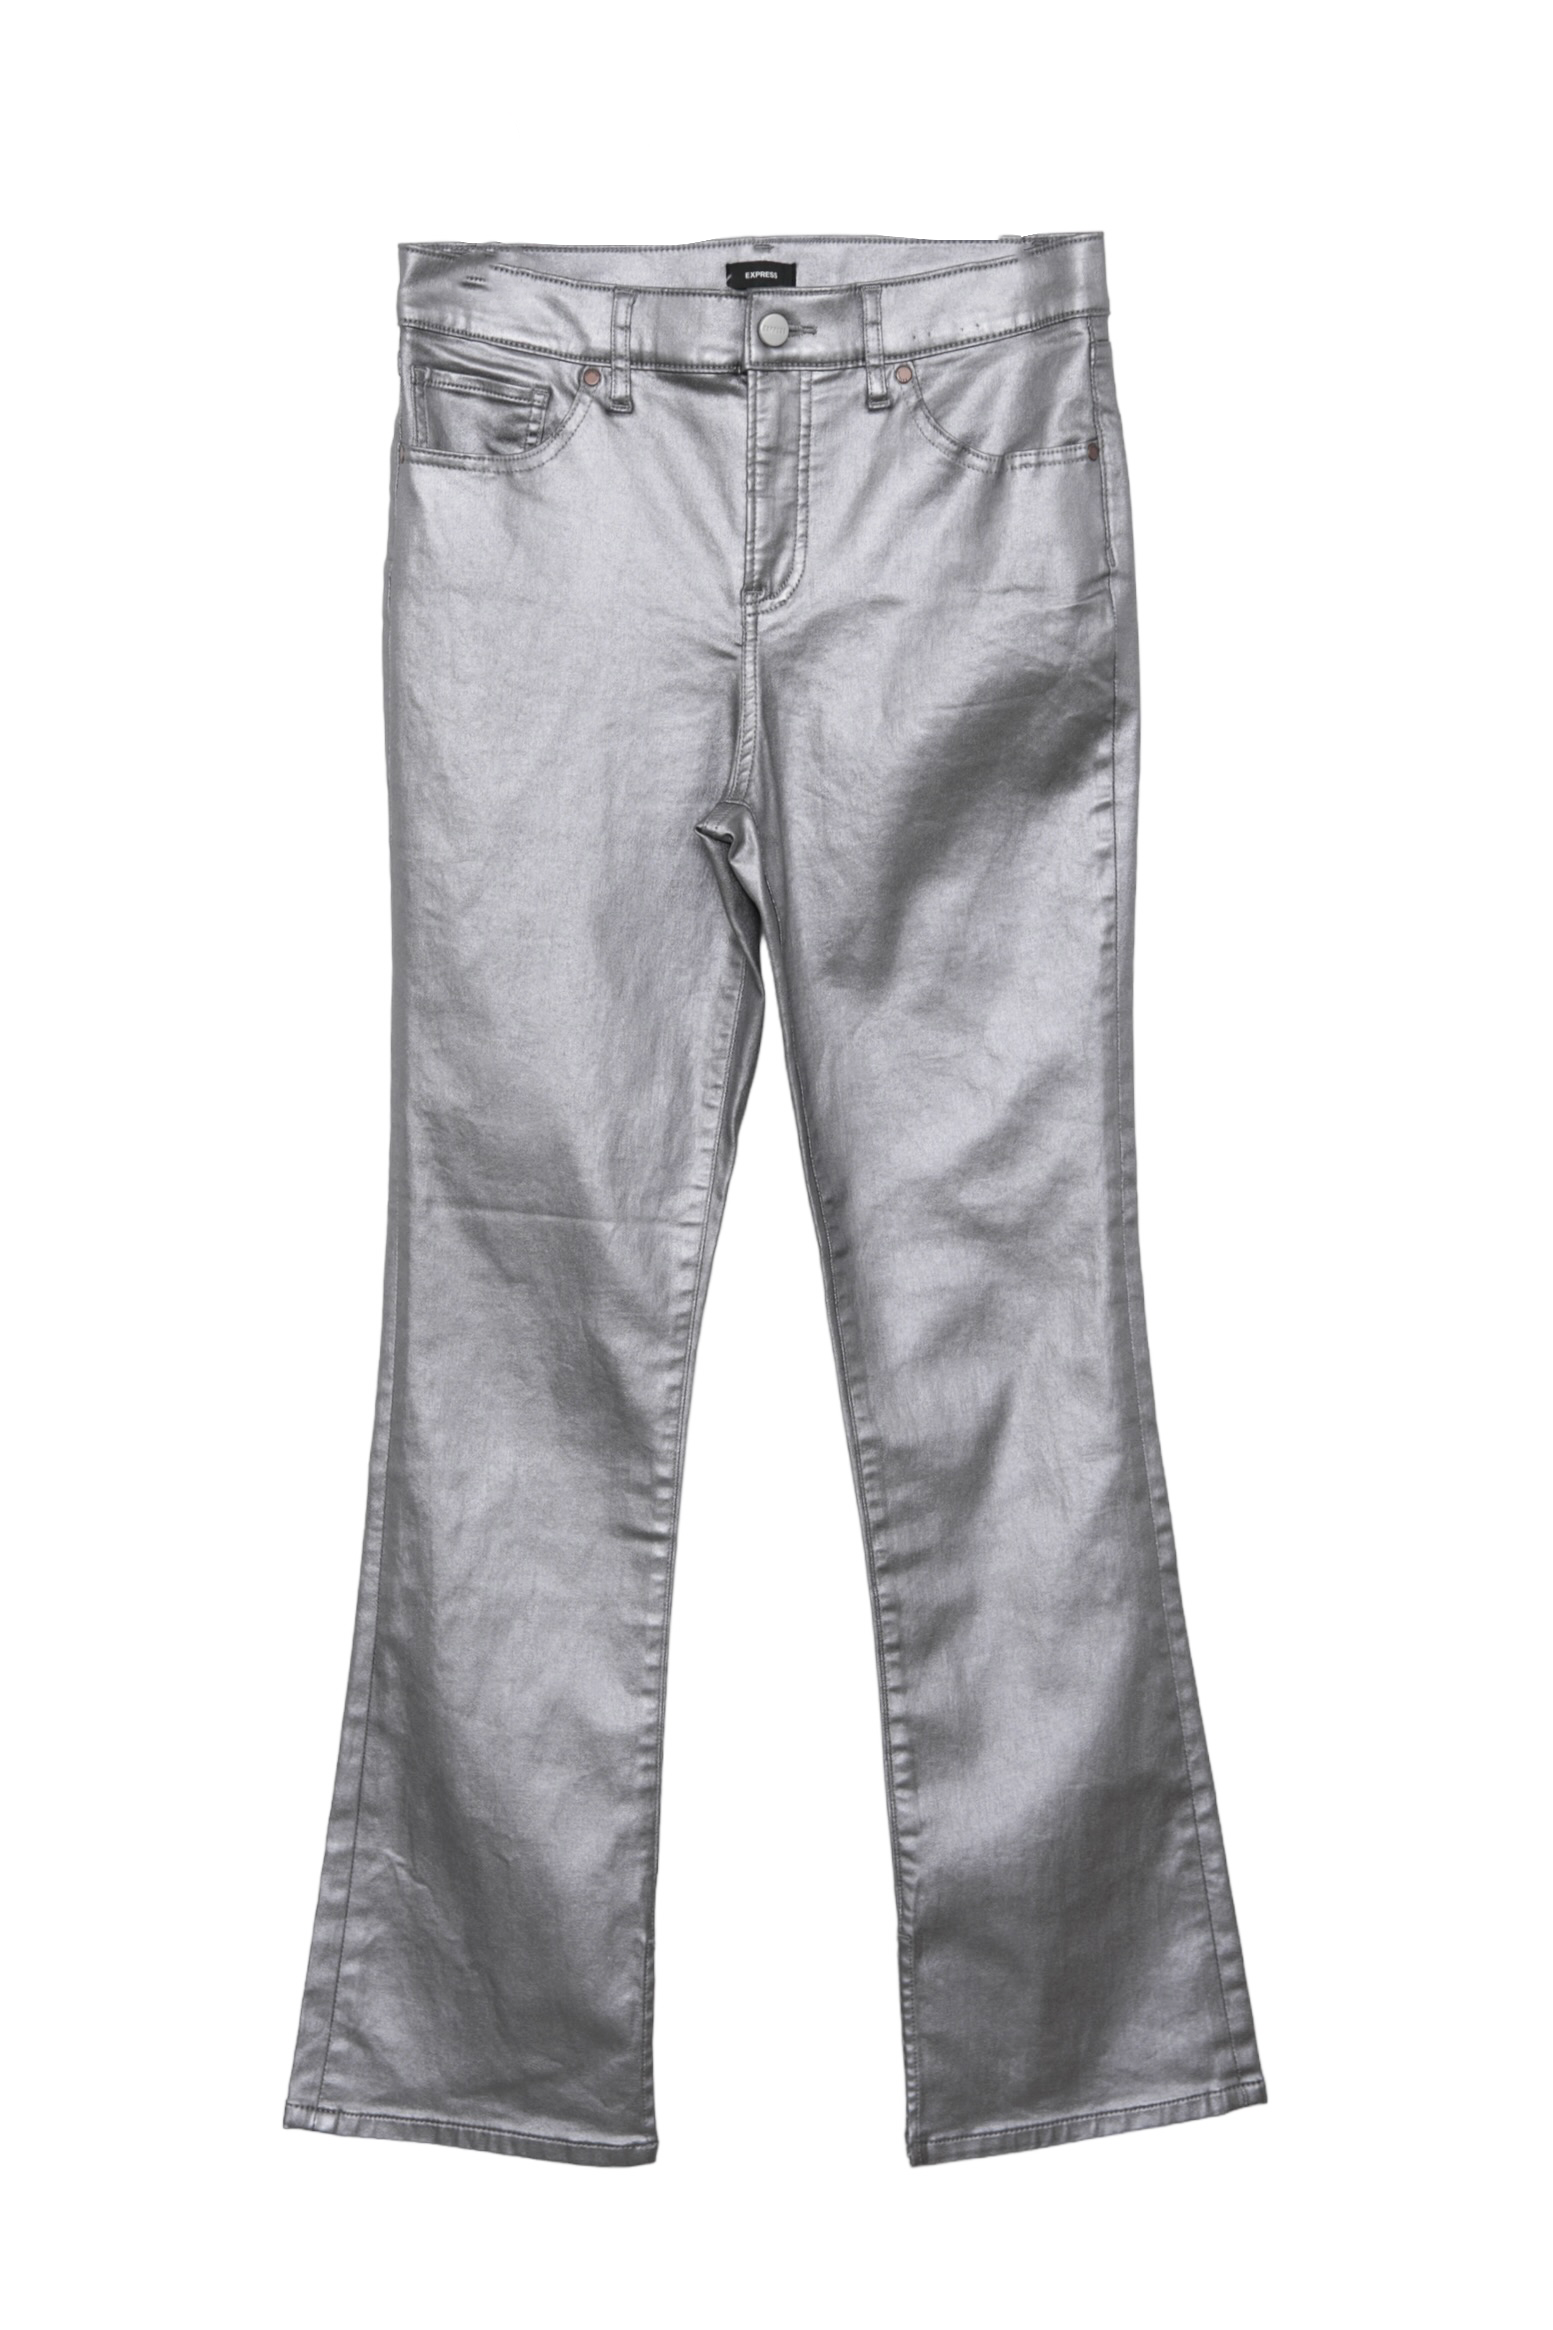 SILVER FLARE PANTS